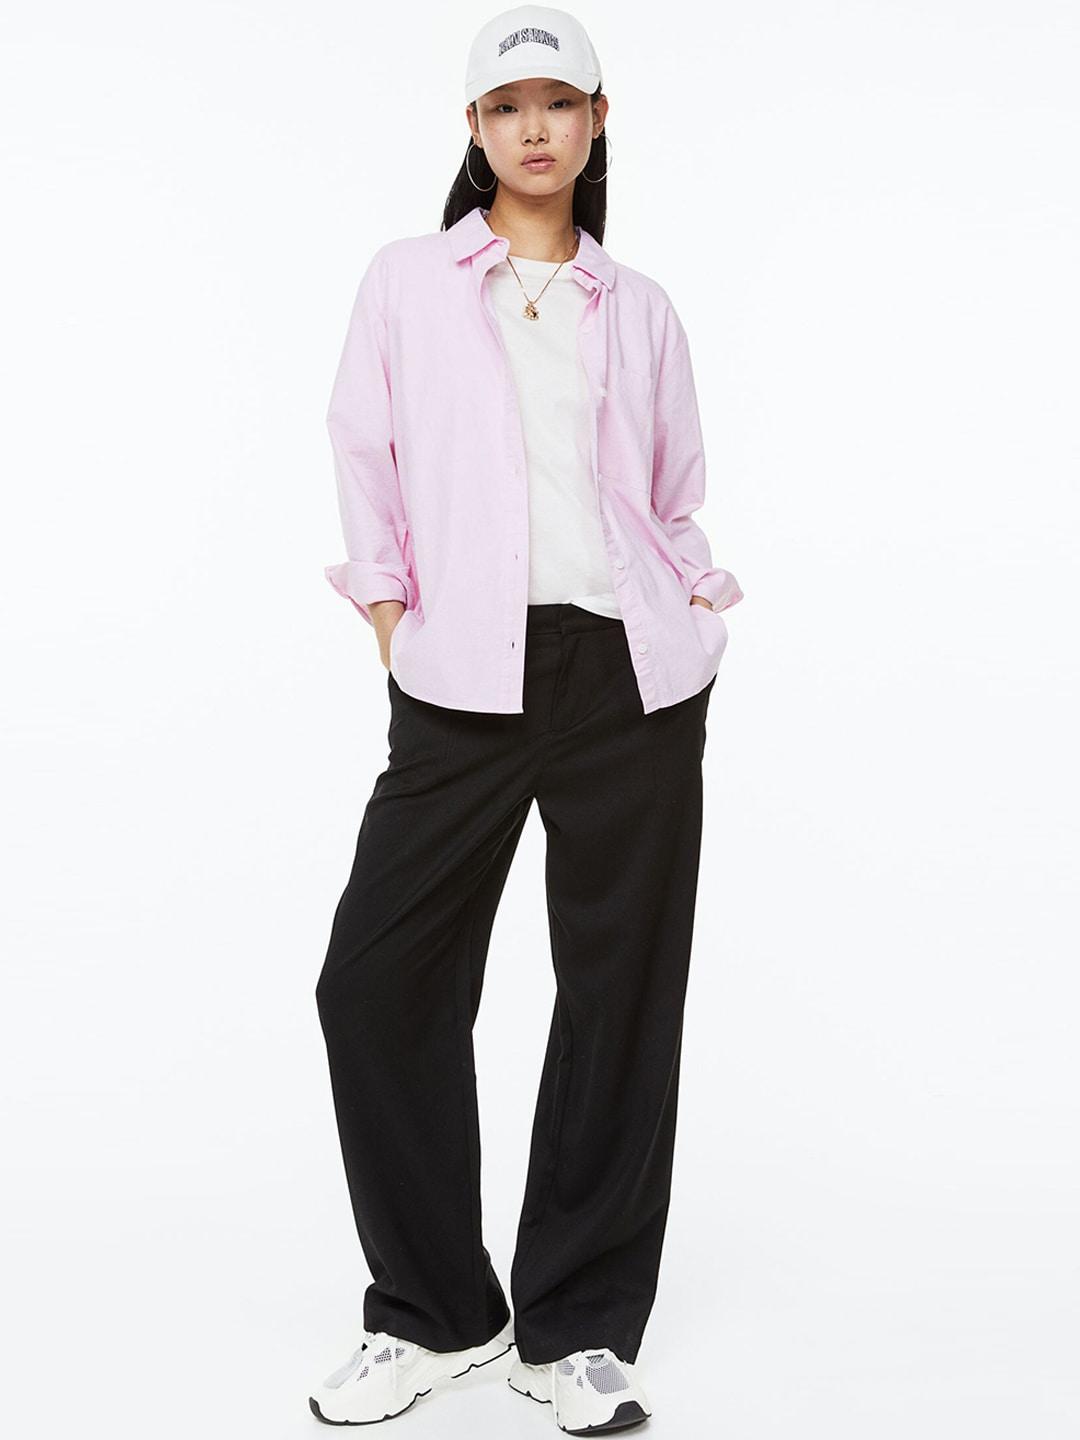 h&m-women-tailored-trousers